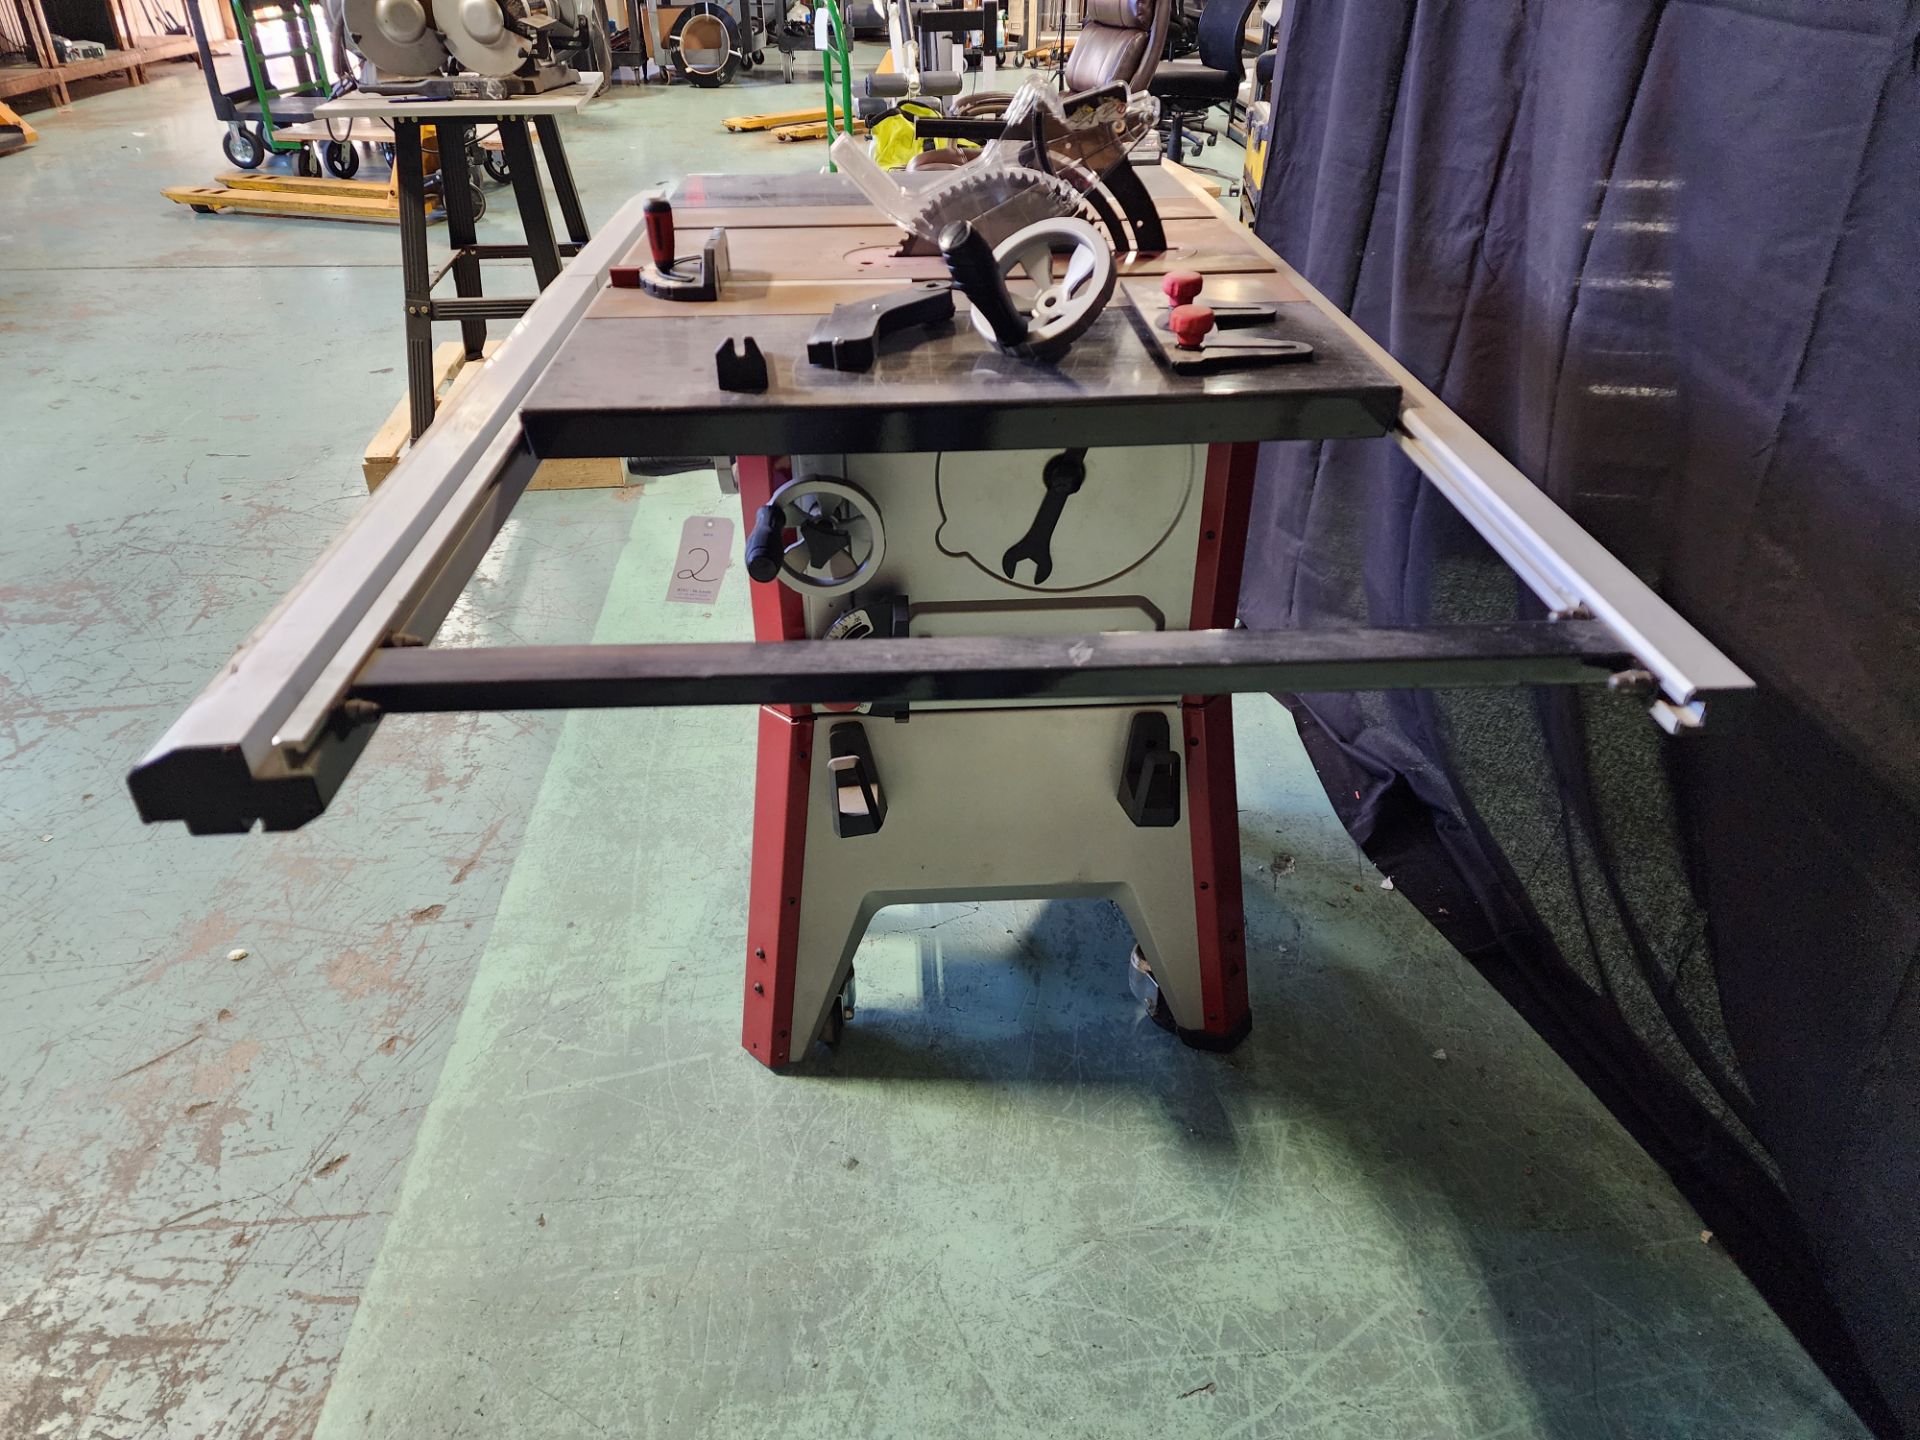 Craftsman Model 351.218331 10" Table Saw, S/N 201306 (2013) - Image 5 of 9